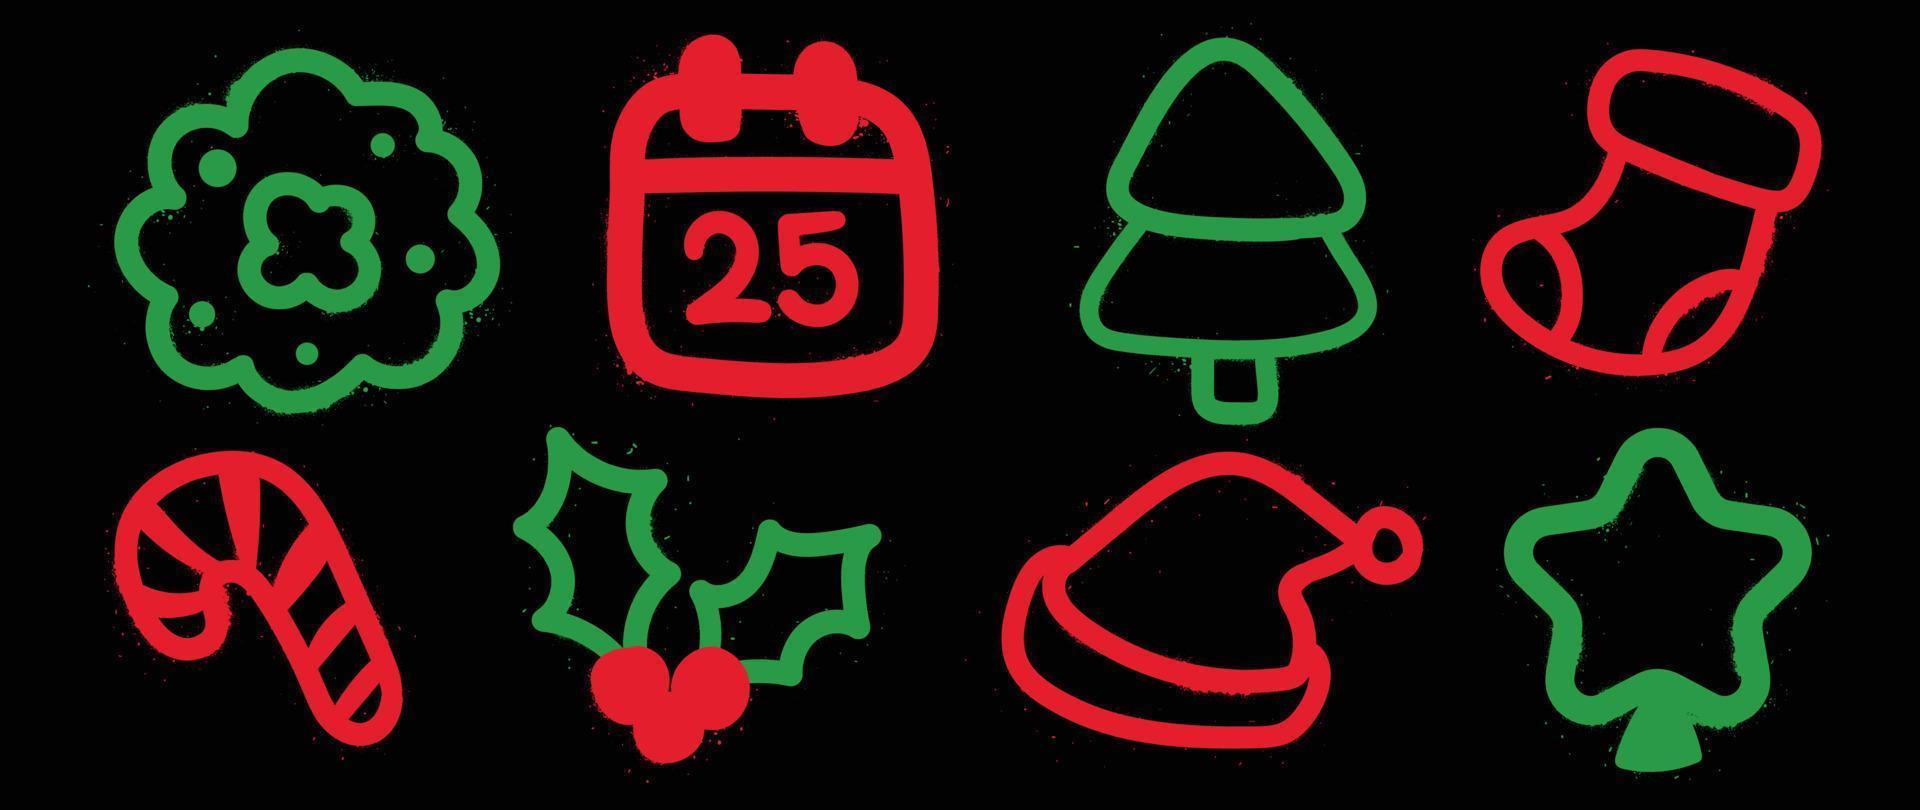 Set of christmas elements spray paint vector. Graffiti, grunge, glow elements of santa hat, candy cane, sock, tree, holly on black background. Design illustration for decoration, card, sticker. vector